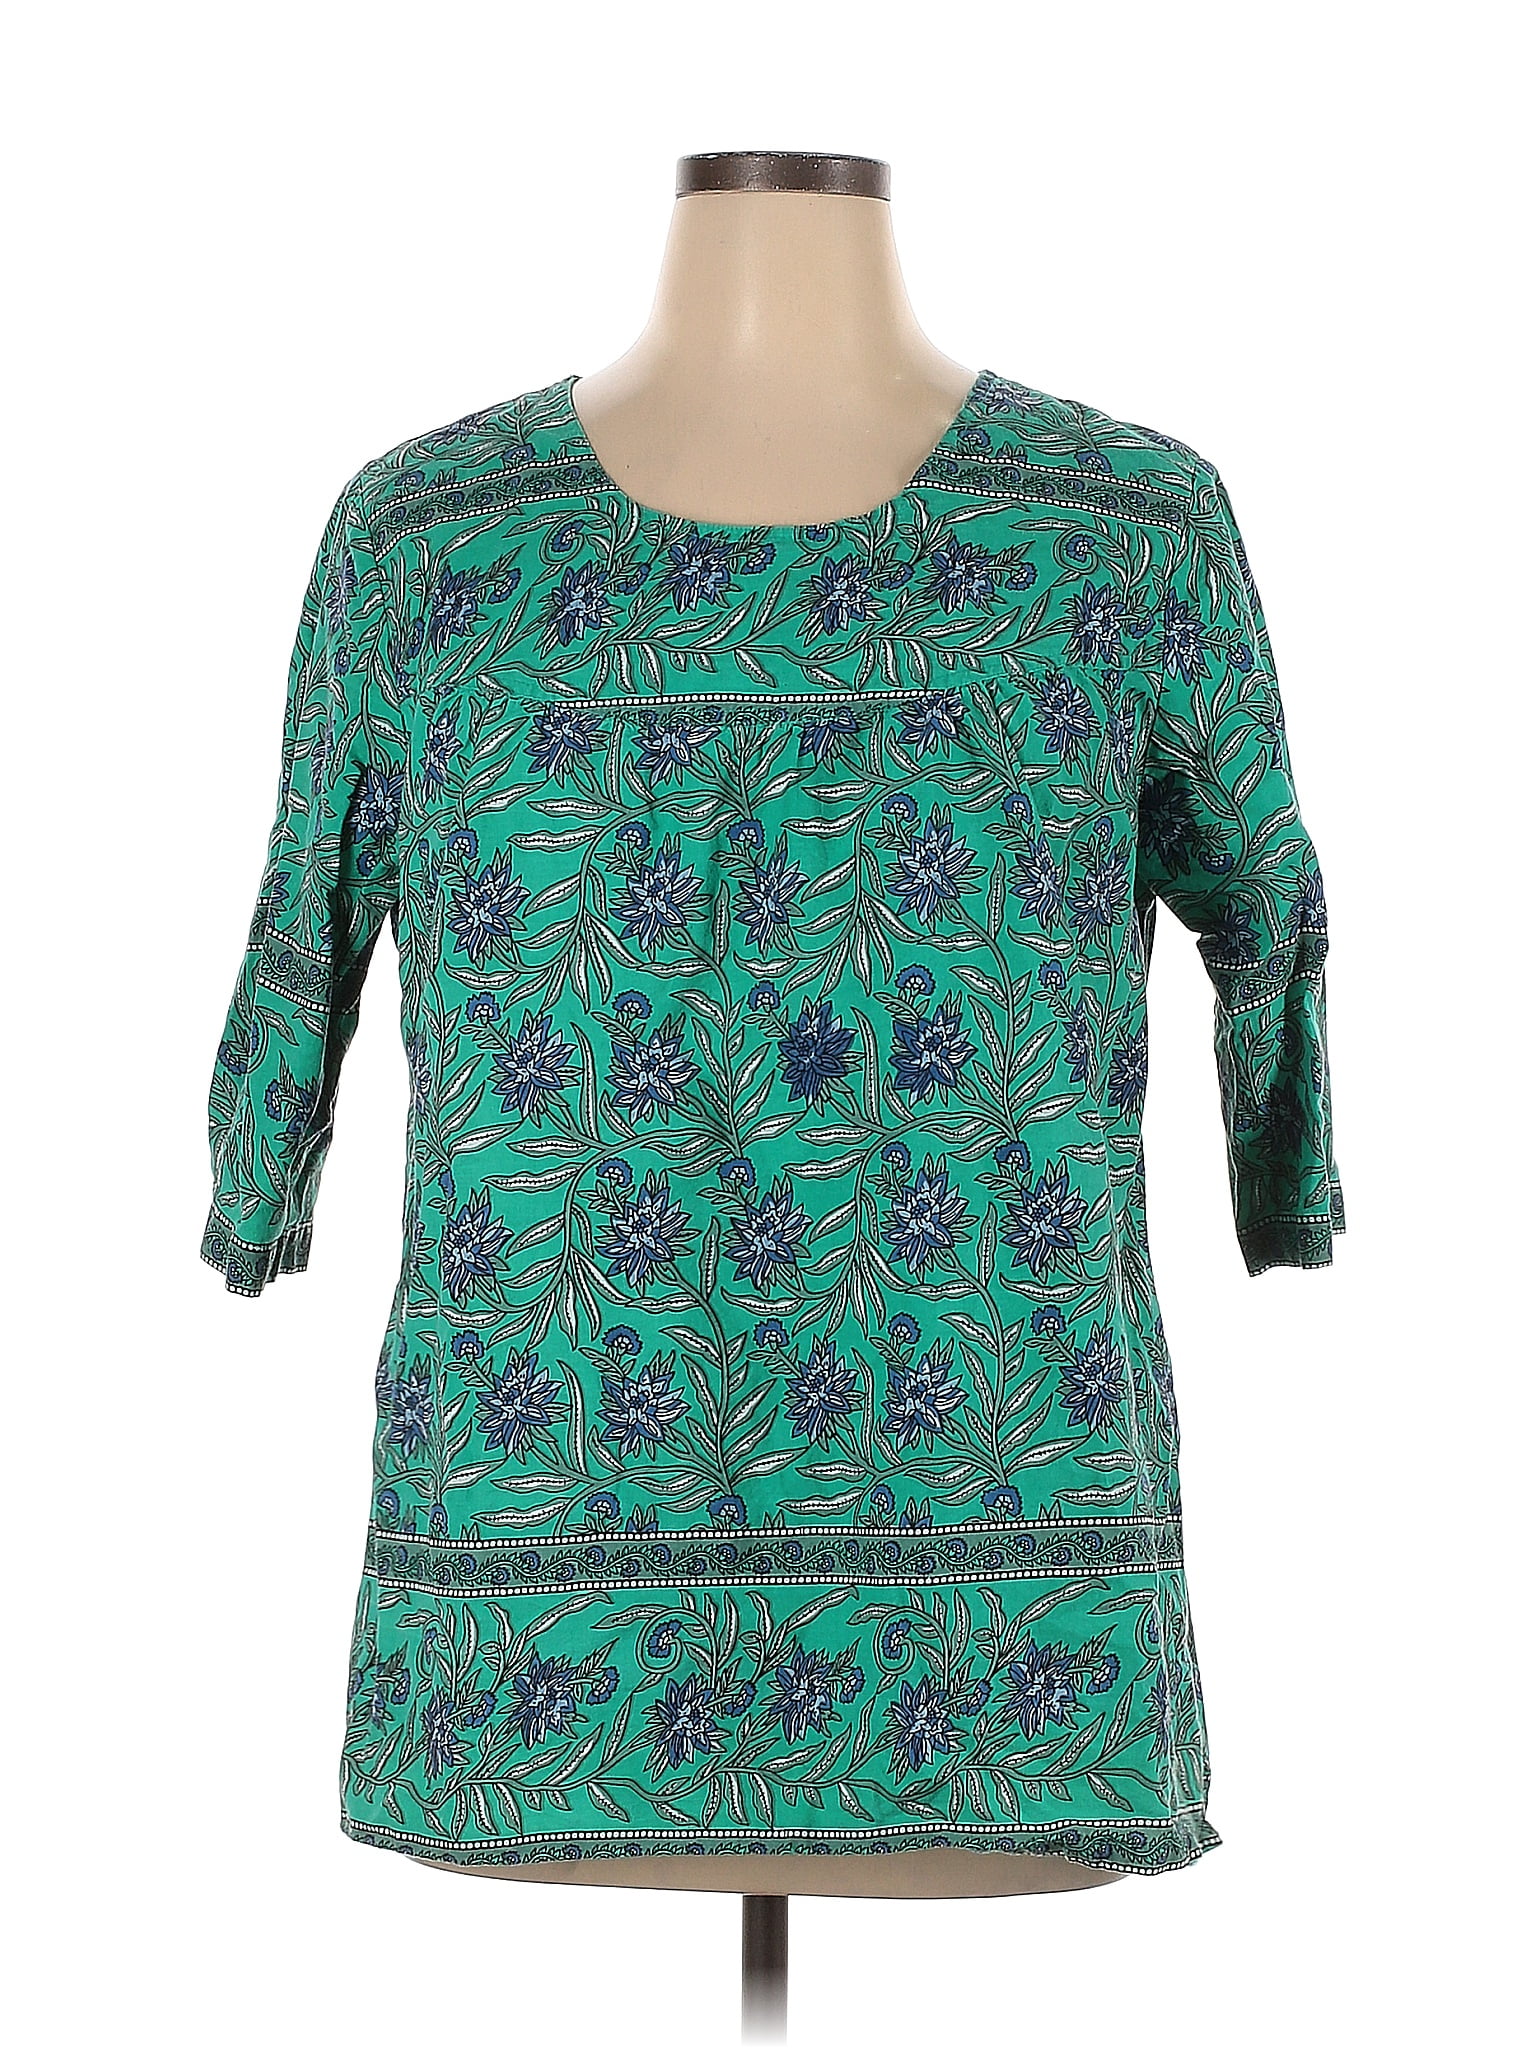 The Vermont Country Store 100% Cotton Paisley Green Short Sleeve Blouse ...